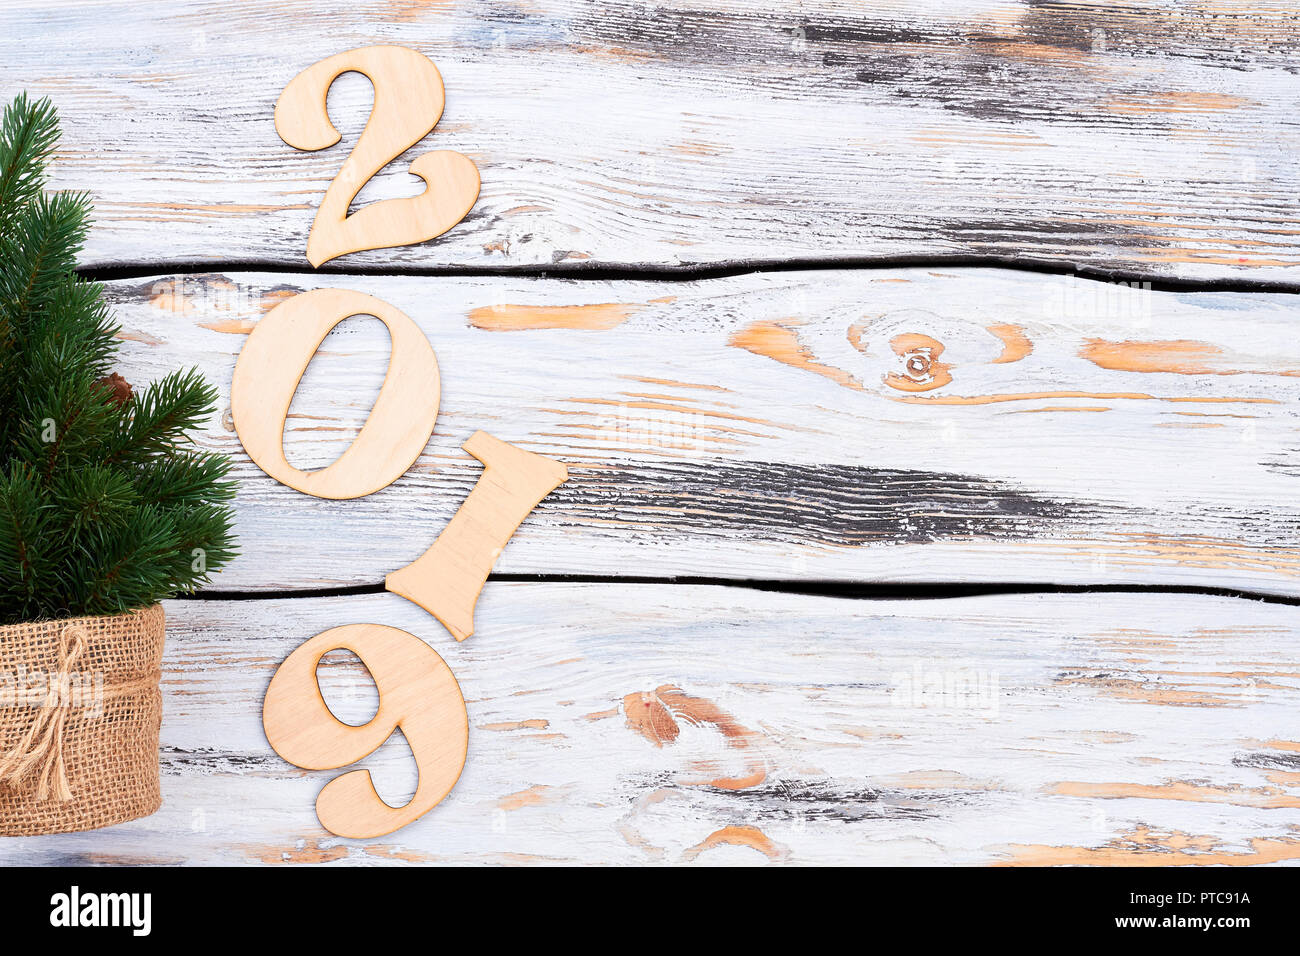 Christmas tree, number 2019, copy space. Little green Christmas tree and wooden numbers forming number 20189 on vintage wooden background, symbol of N Stock Photo